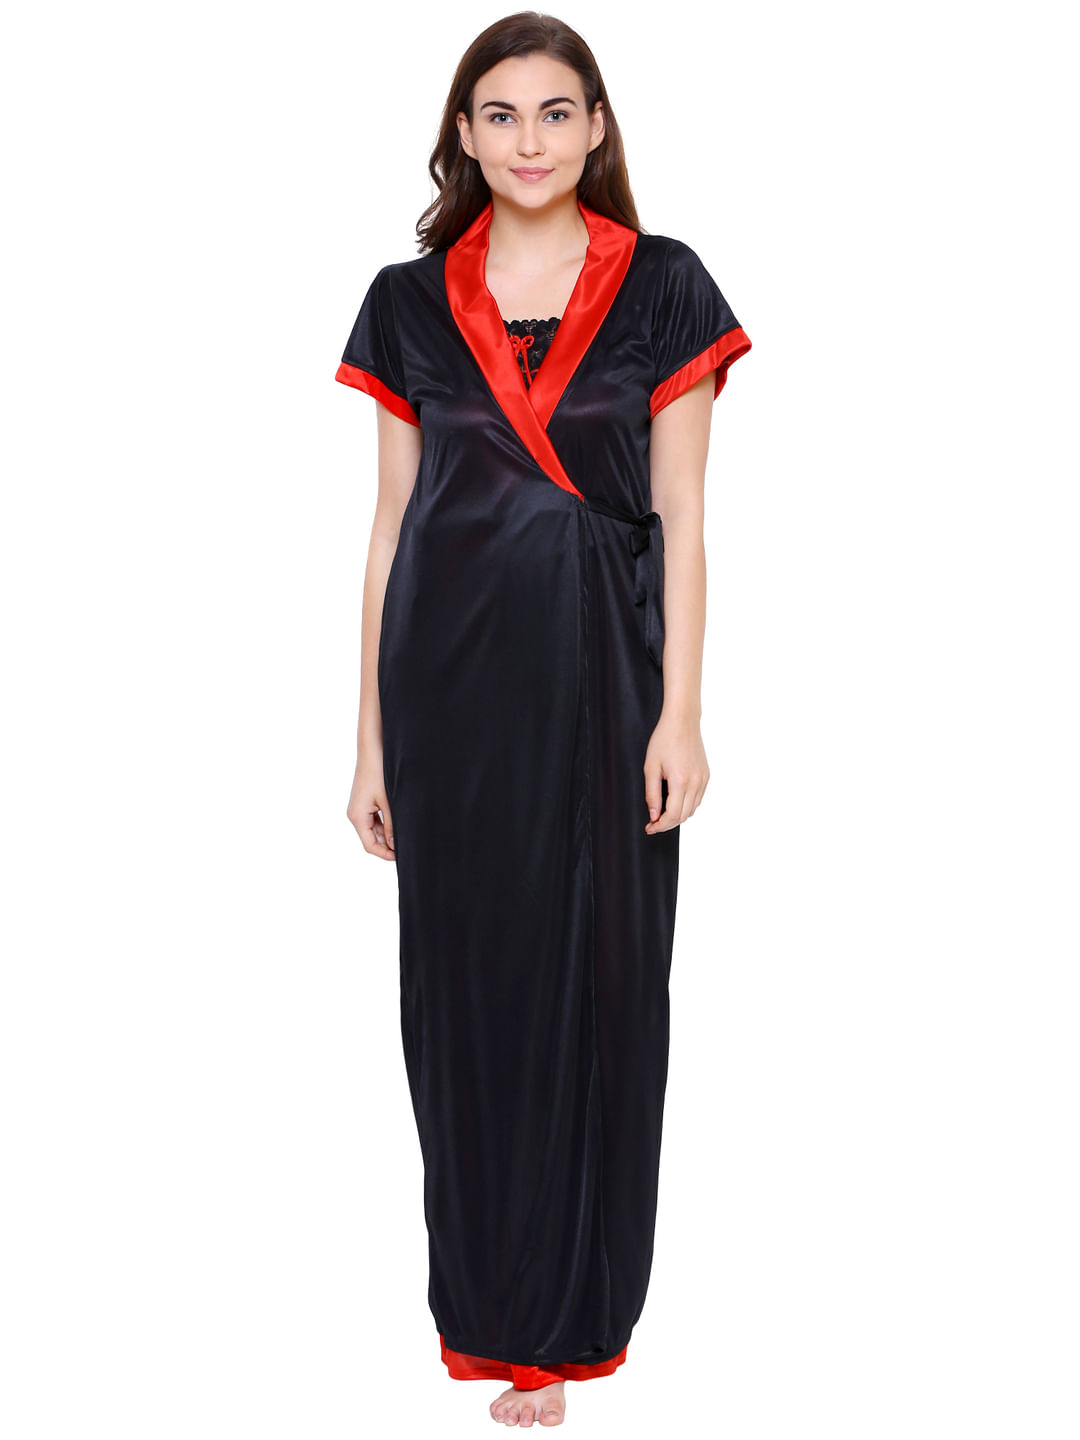 Satin Black-Red Nighty with Robe (Free Size)